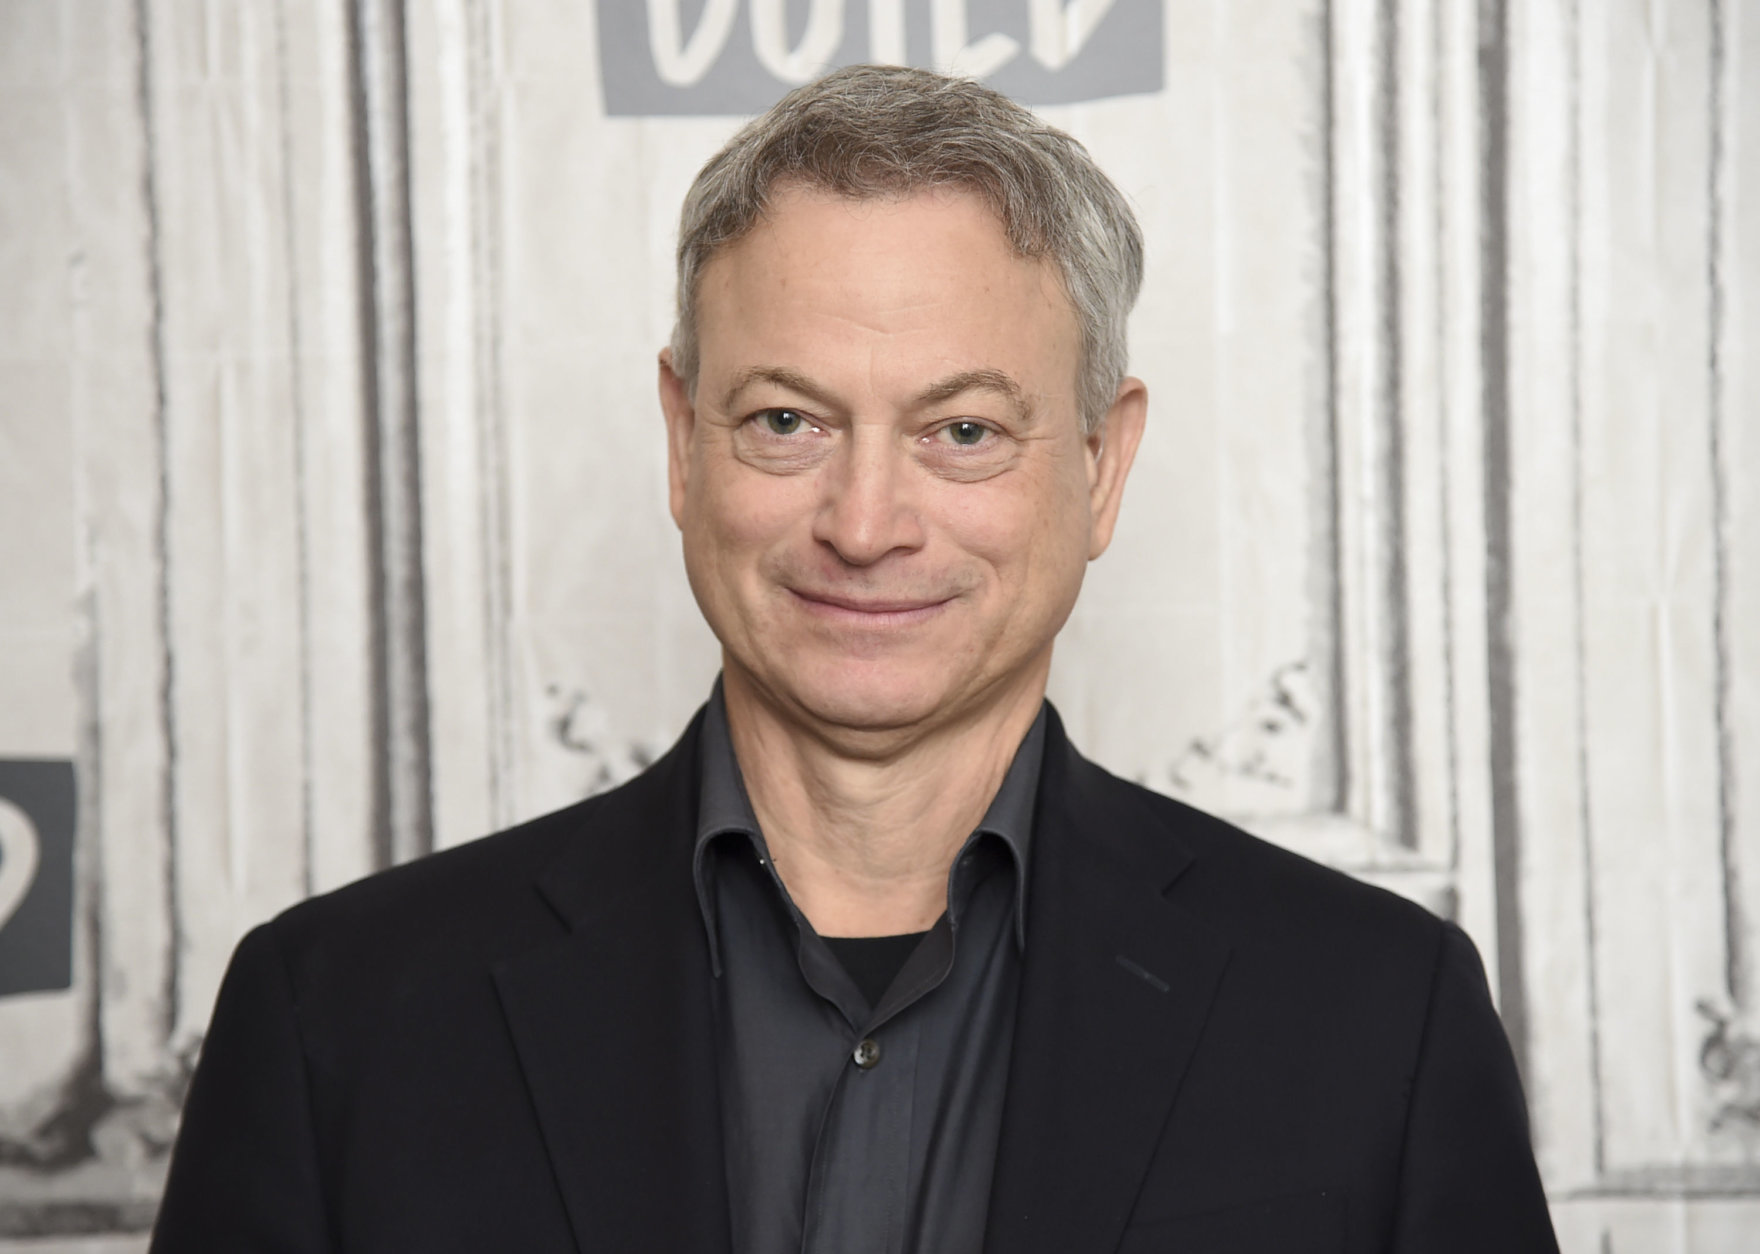 Actor Gary Sinise participates in the BUILD Speaker Series to discuss the Snowball Express, serving the children of our fallen military heroes, at AOL Studios on Thursday, March 22, 2018, in New York. (Photo by Evan Agostini/Invision/AP)